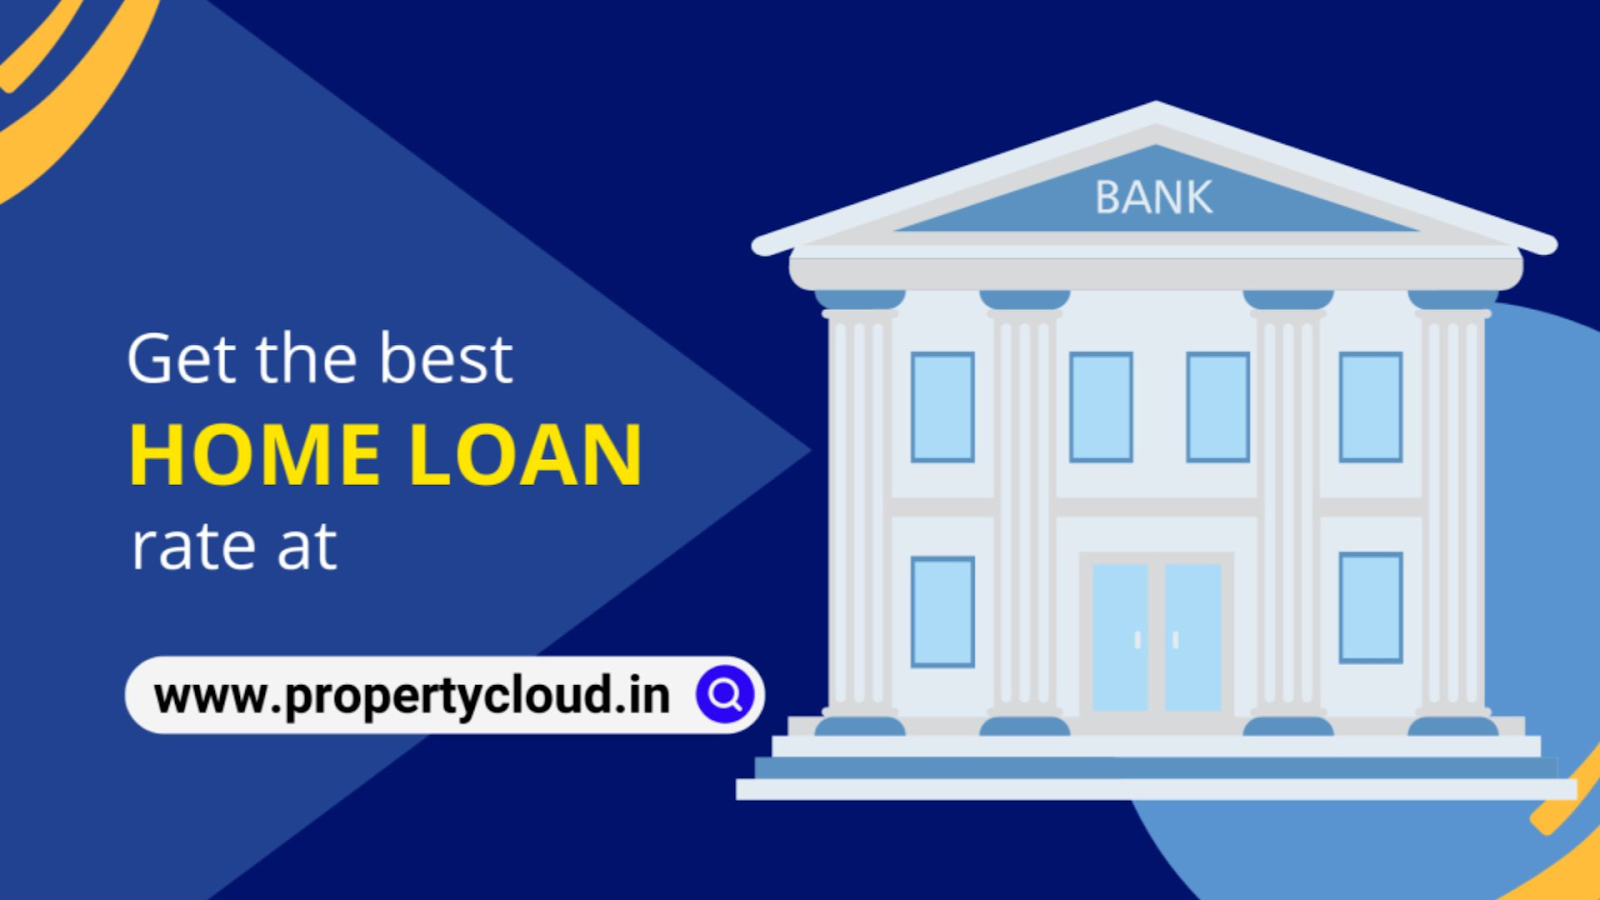 Contact PropertyCloud, and get the best rate on a home loan.